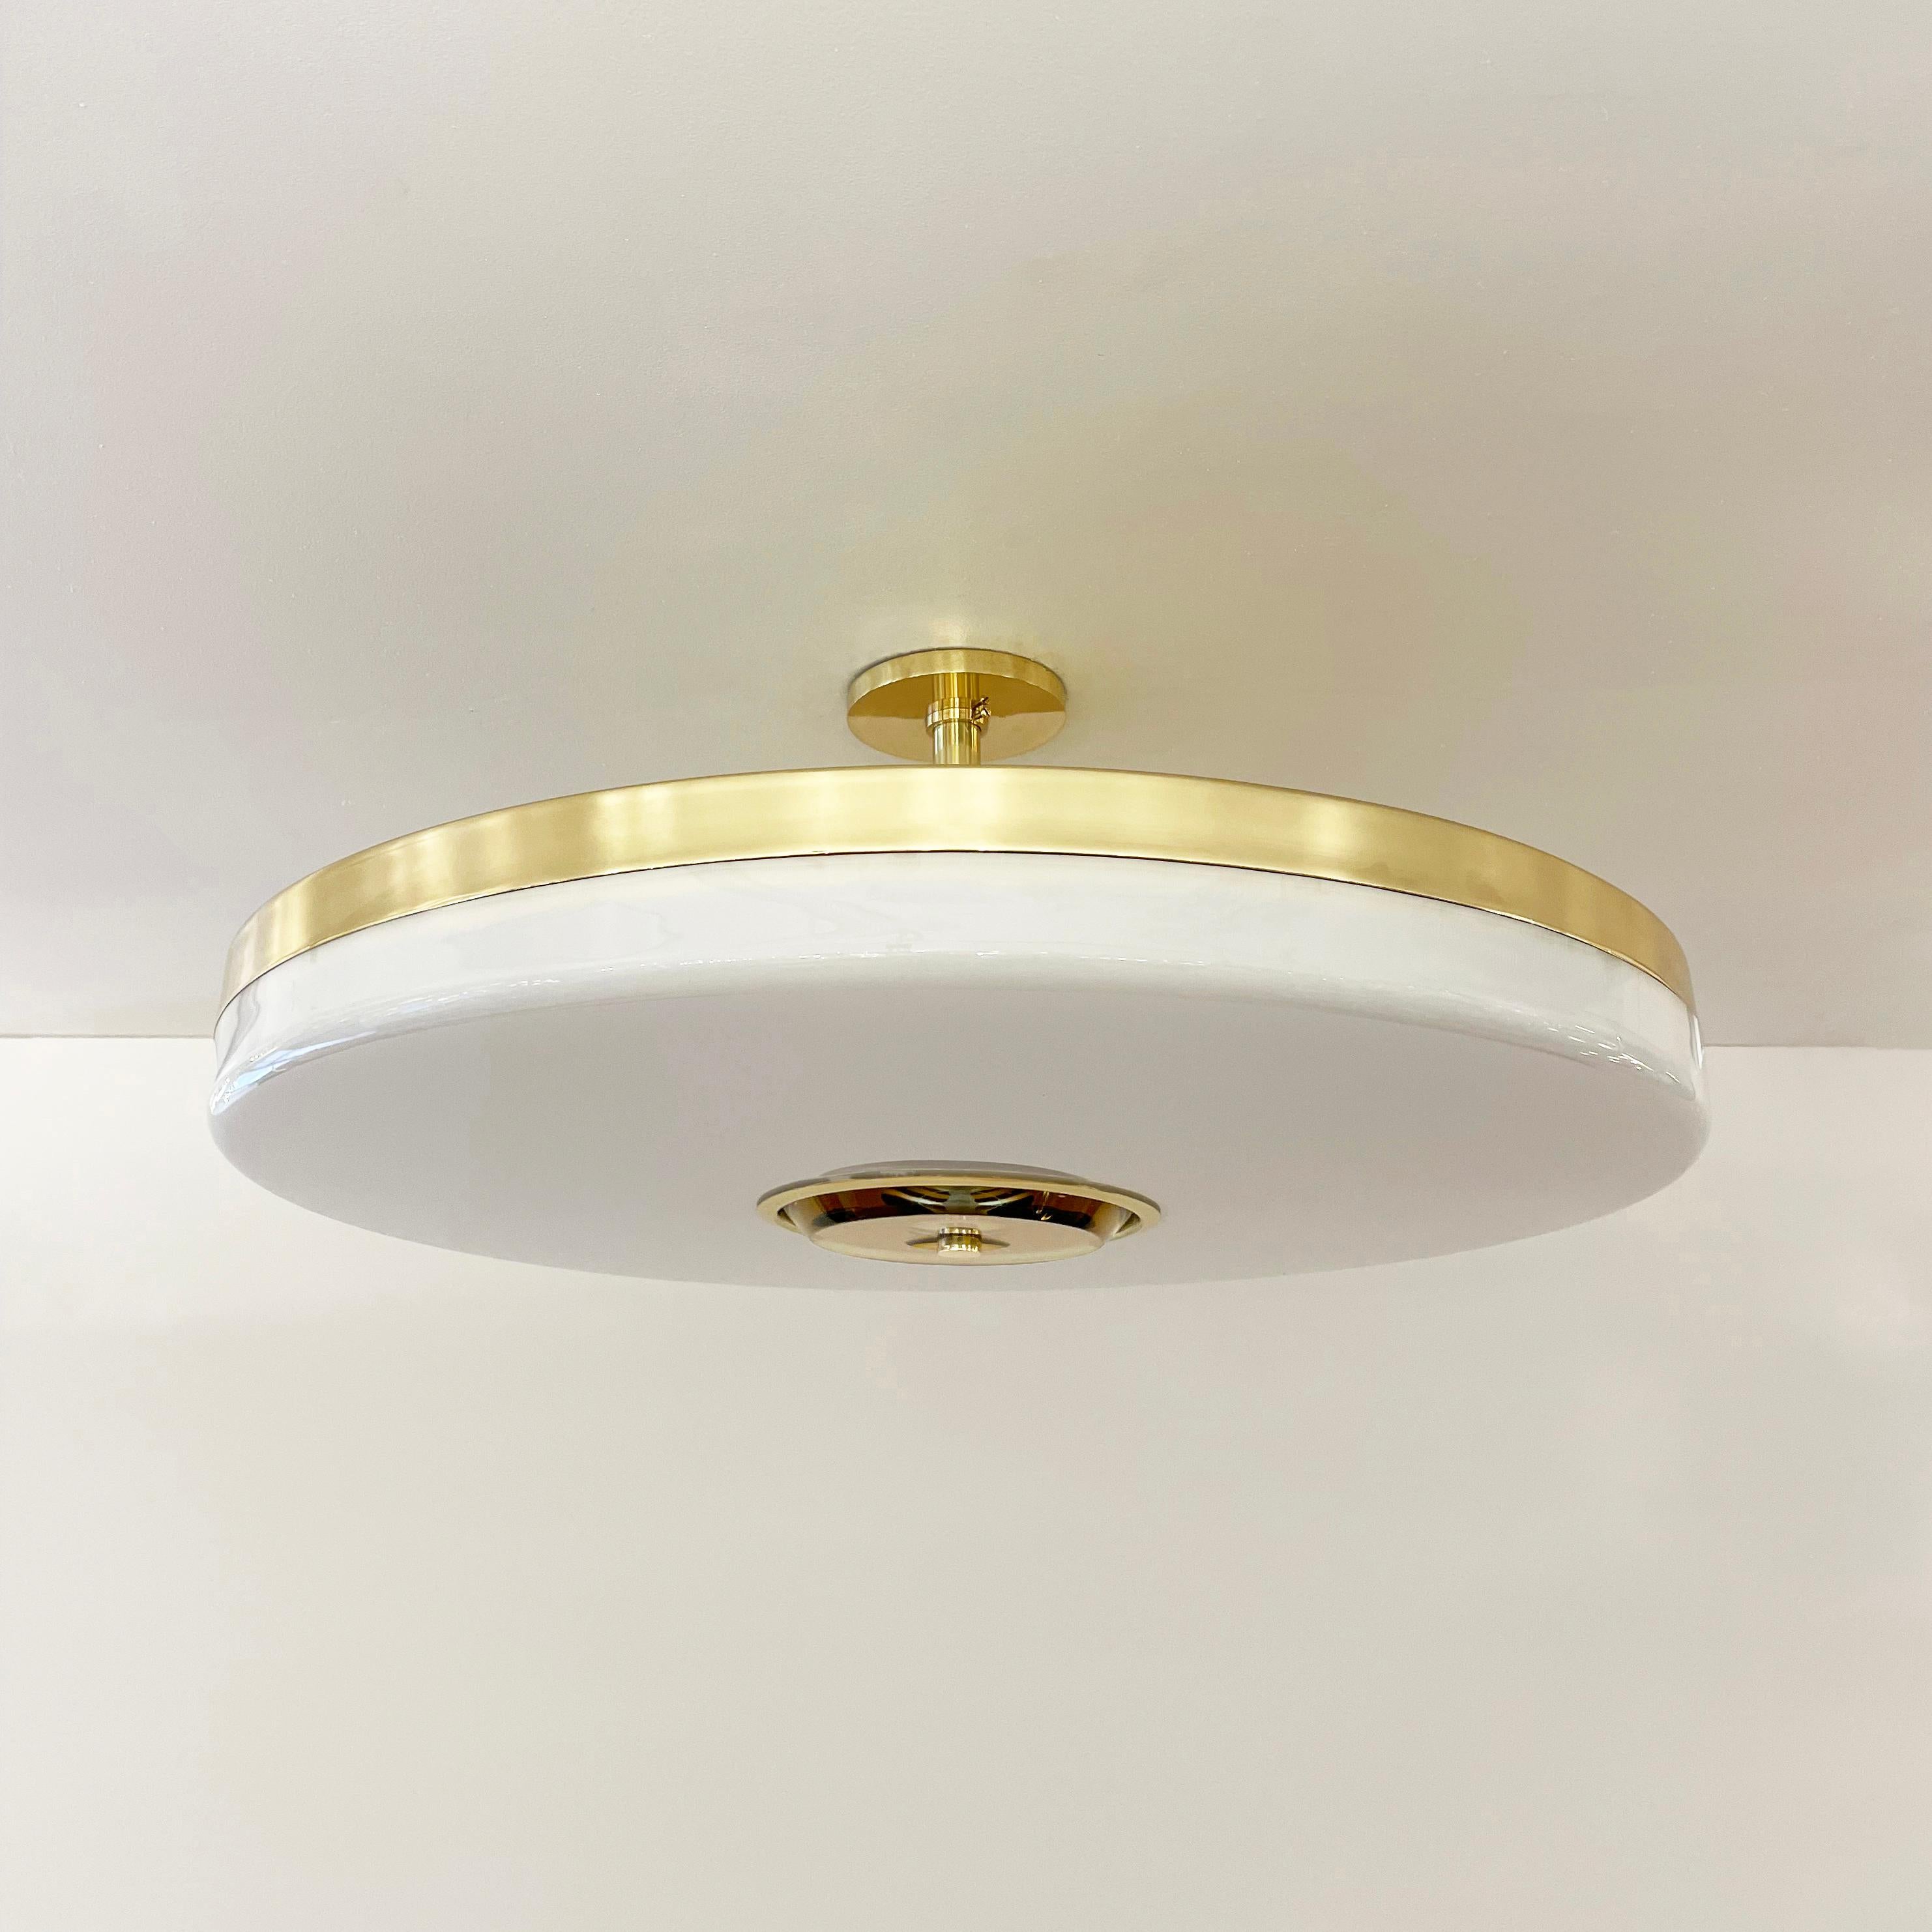 Contemporary Iris Ceiling Light by Gaspare Asaro - Polished Nickel Finish For Sale